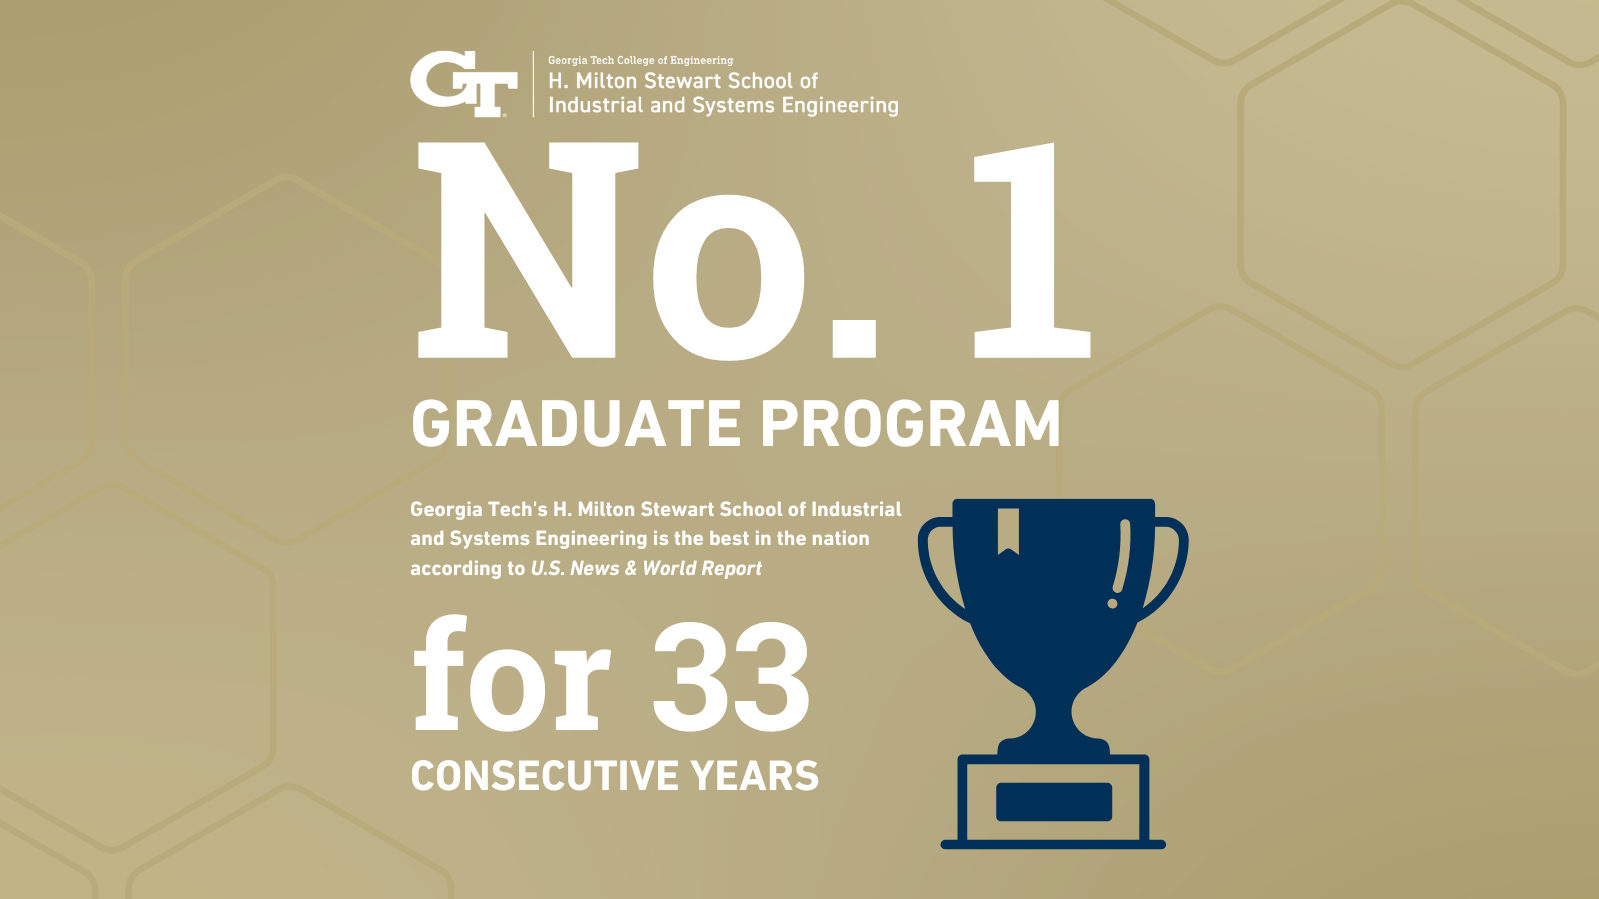 Georgia Tech's H. Milton Stewart School of Industrial and Systems Engineering (ISyE) graduate program has been ranked No.1 by the U.S. News &amp; World Report Best Colleges, for the 33rd consecutive year.